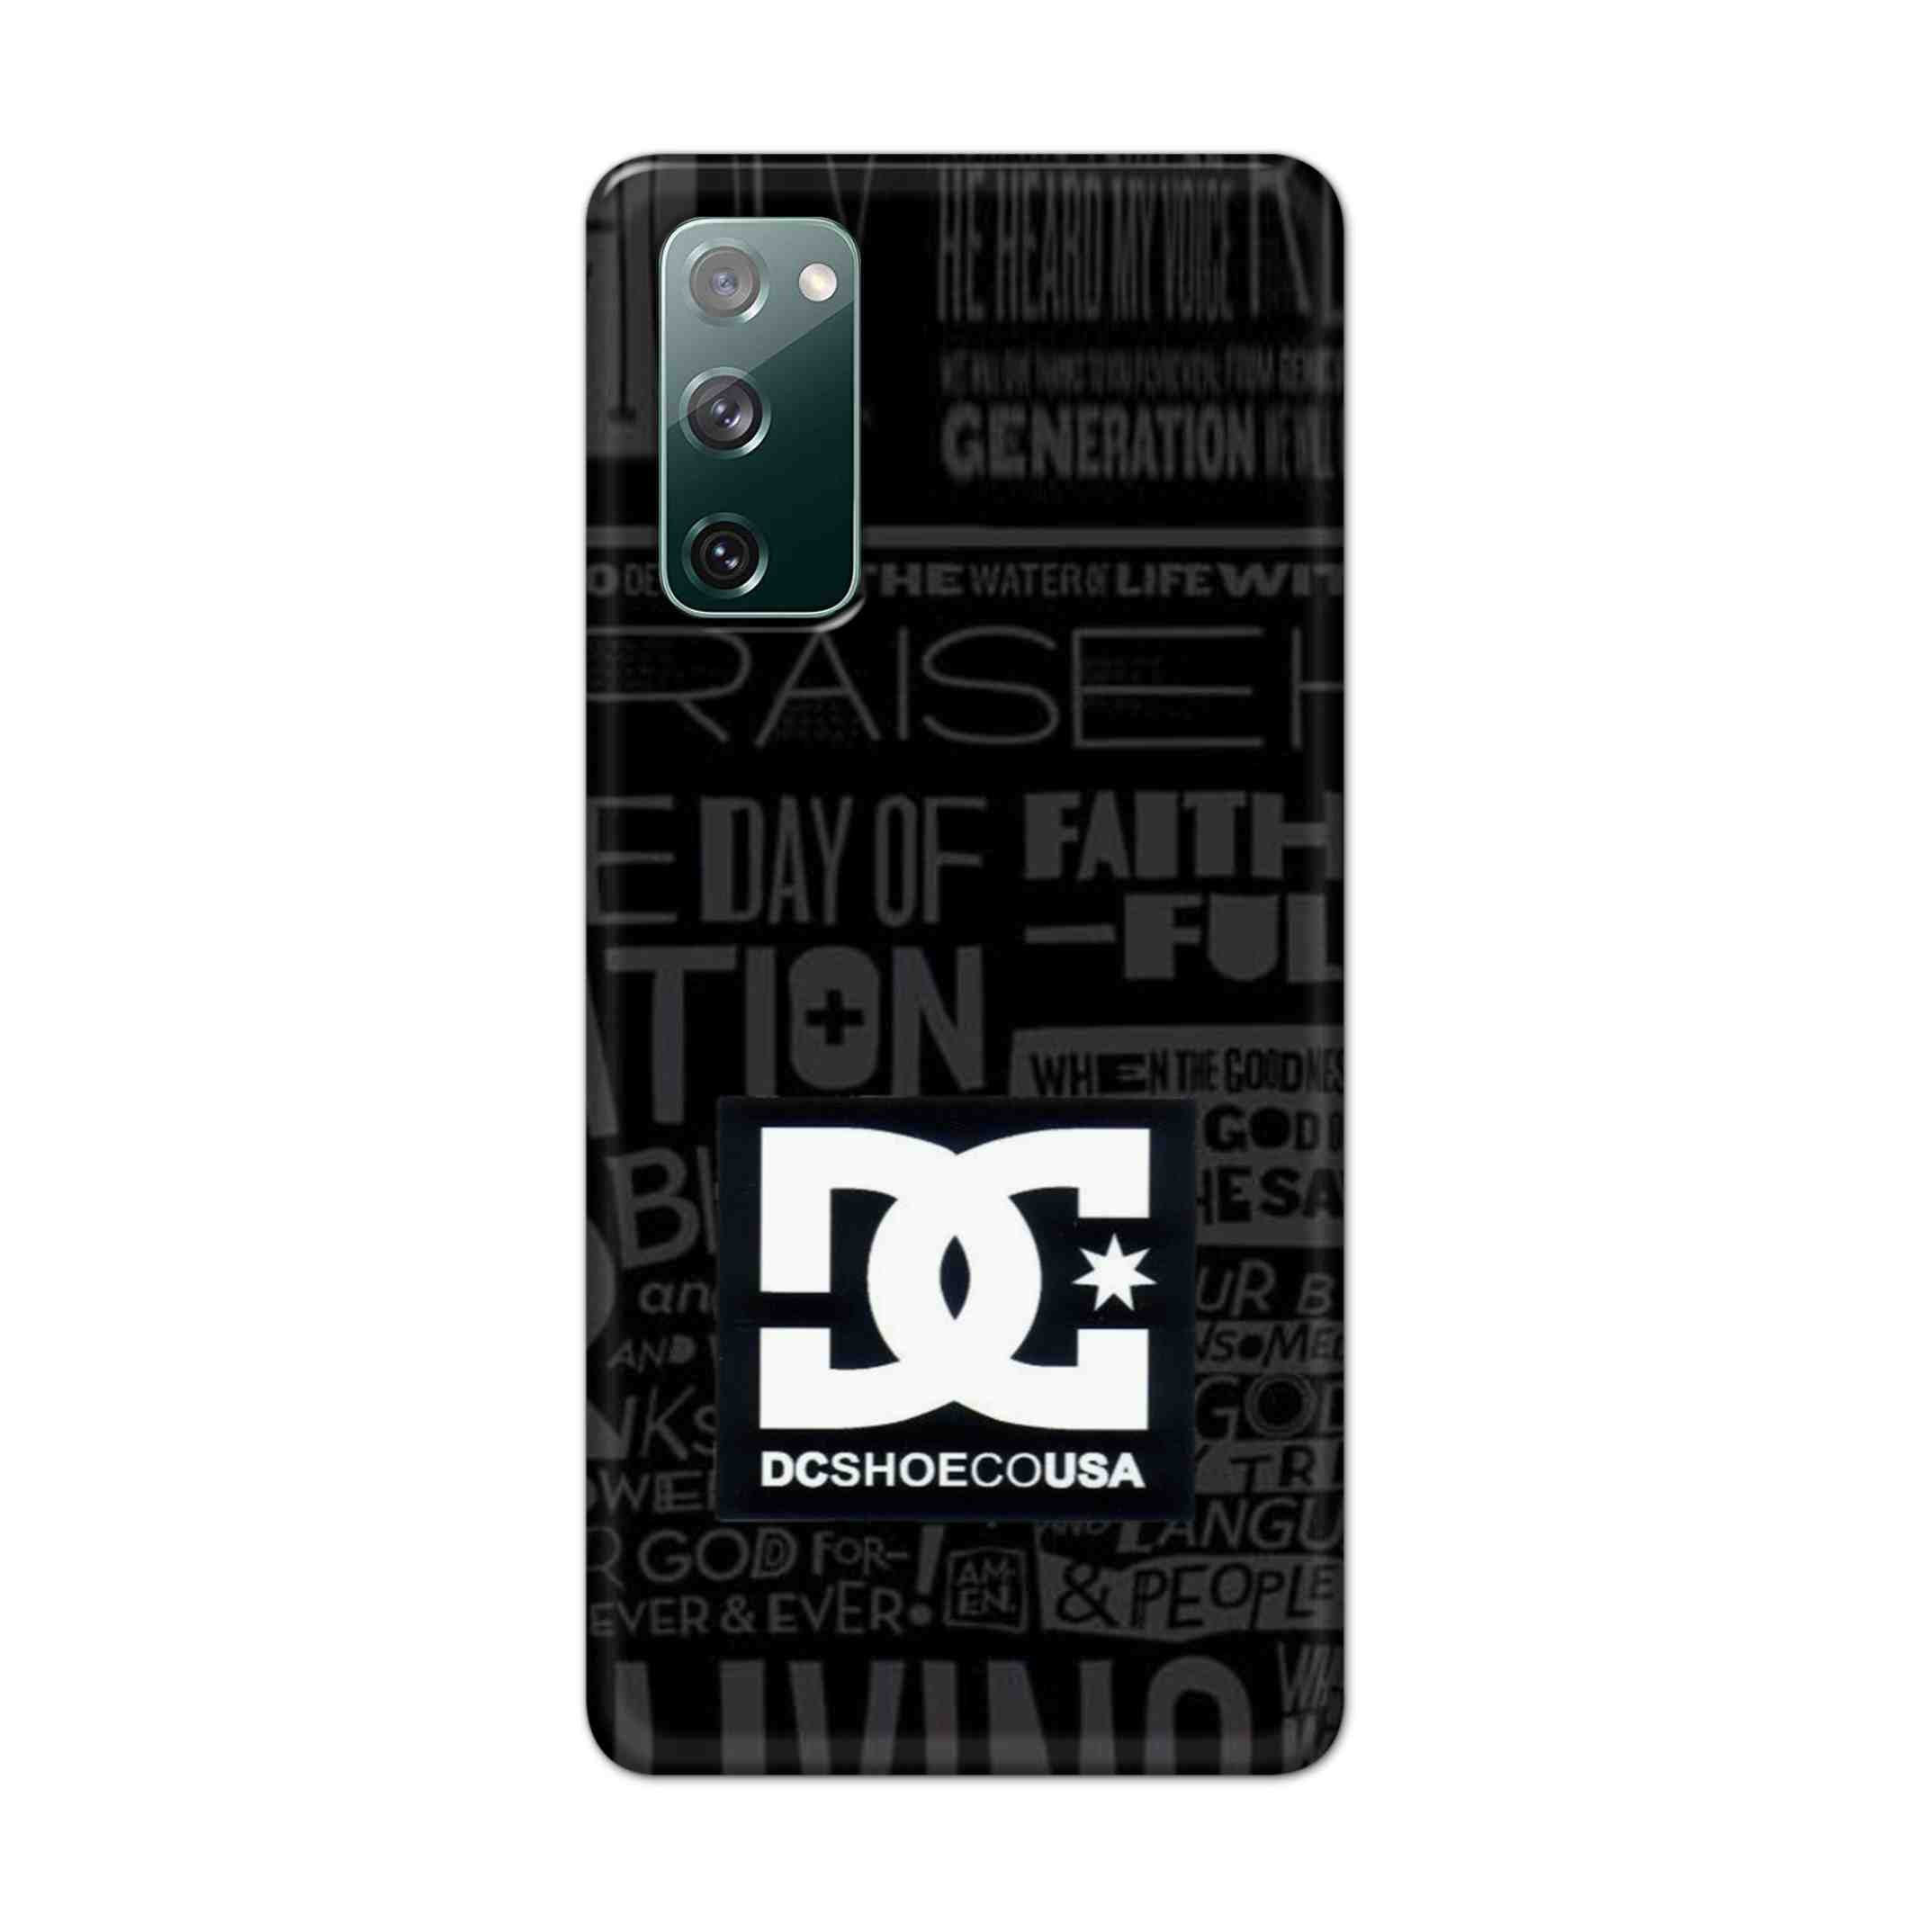 Buy Dc Shoecousa Hard Back Mobile Phone Case Cover For Samsung Galaxy S20 FE Online